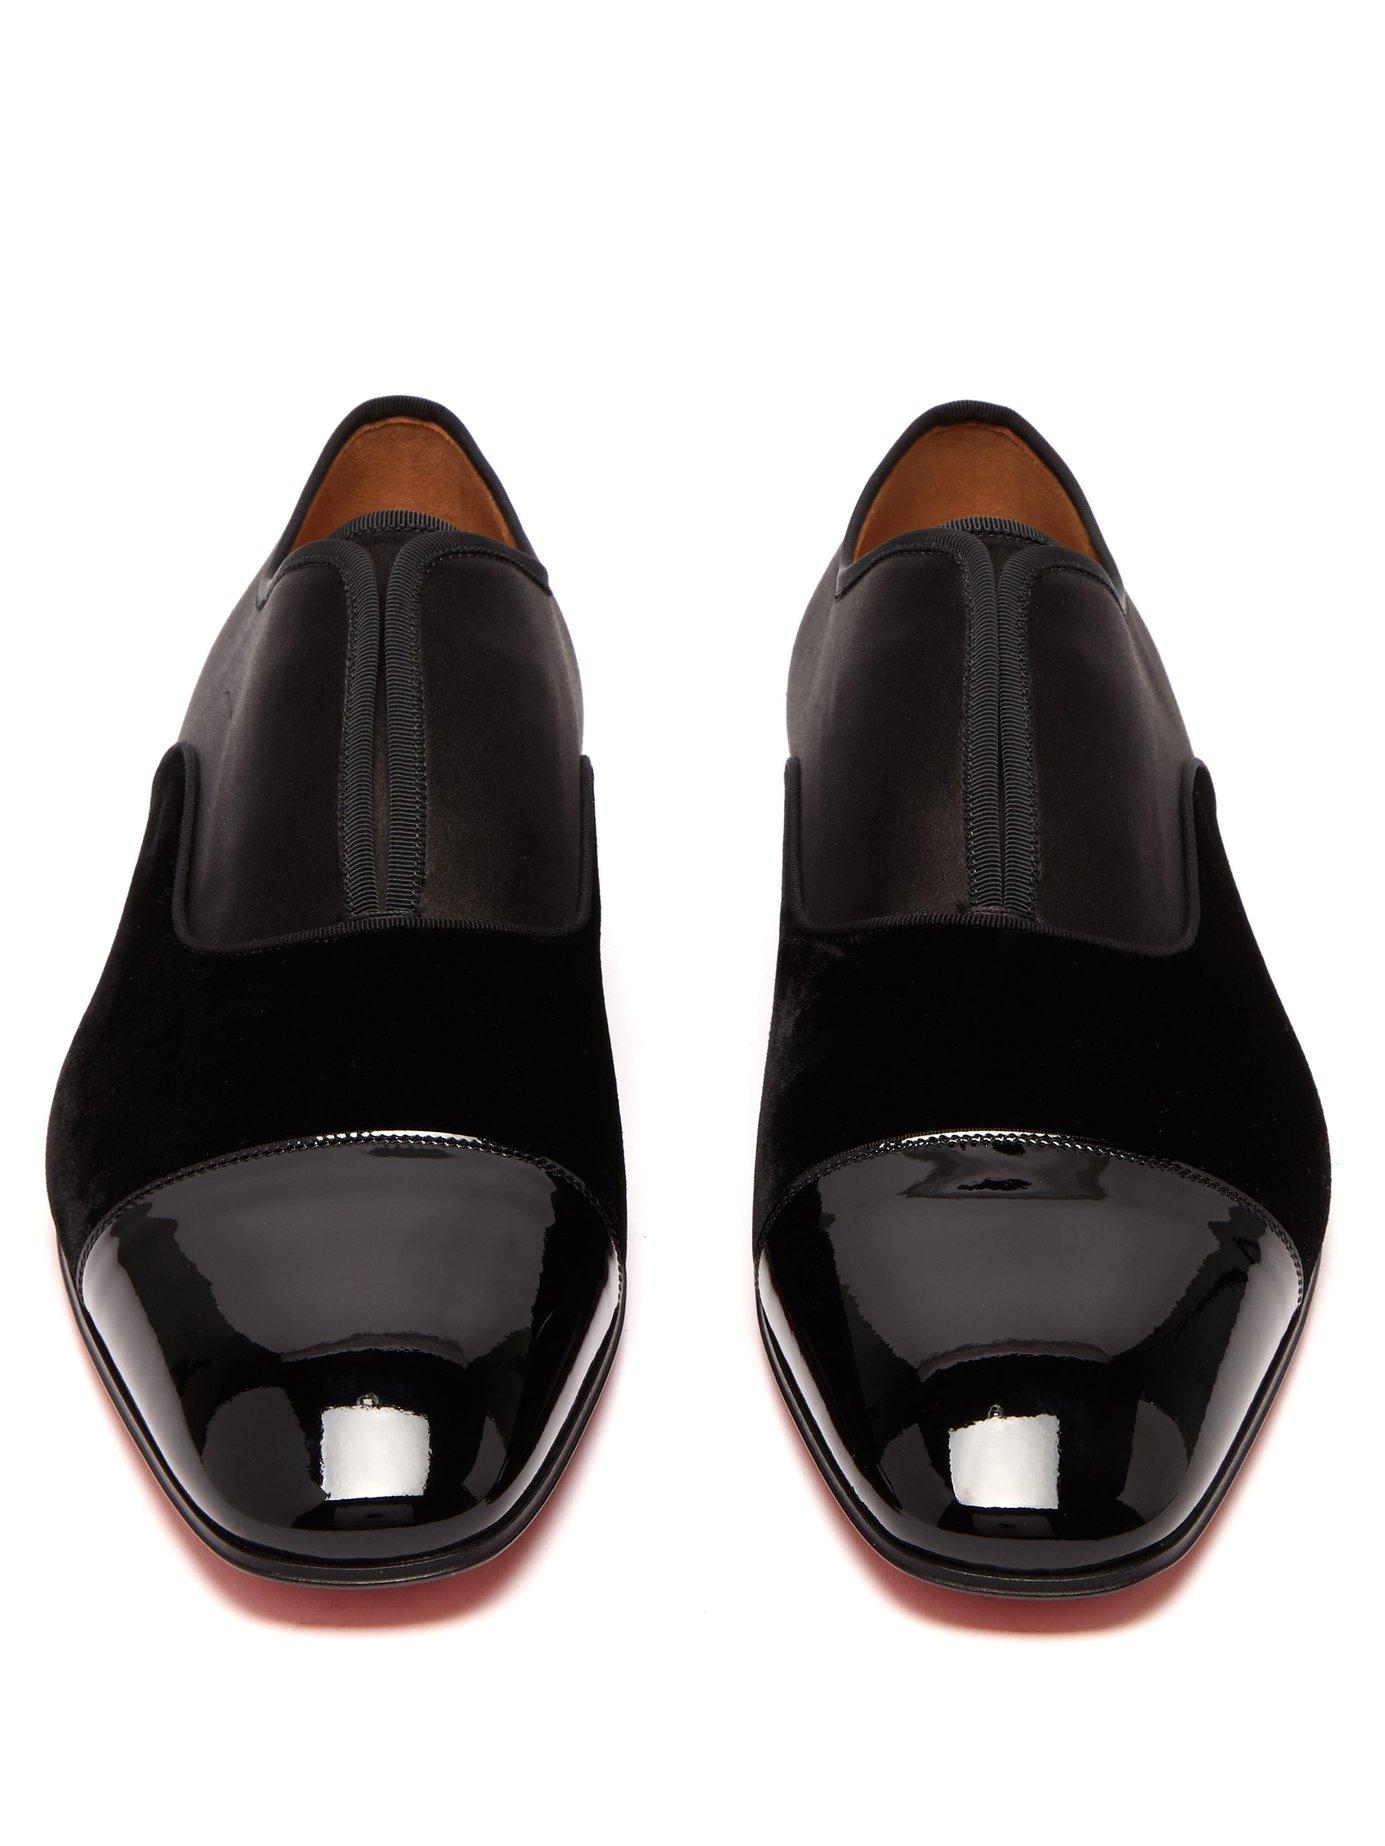 Christian Louboutin Alpha Male Satin And Patent Leather Dress Shoes in ...